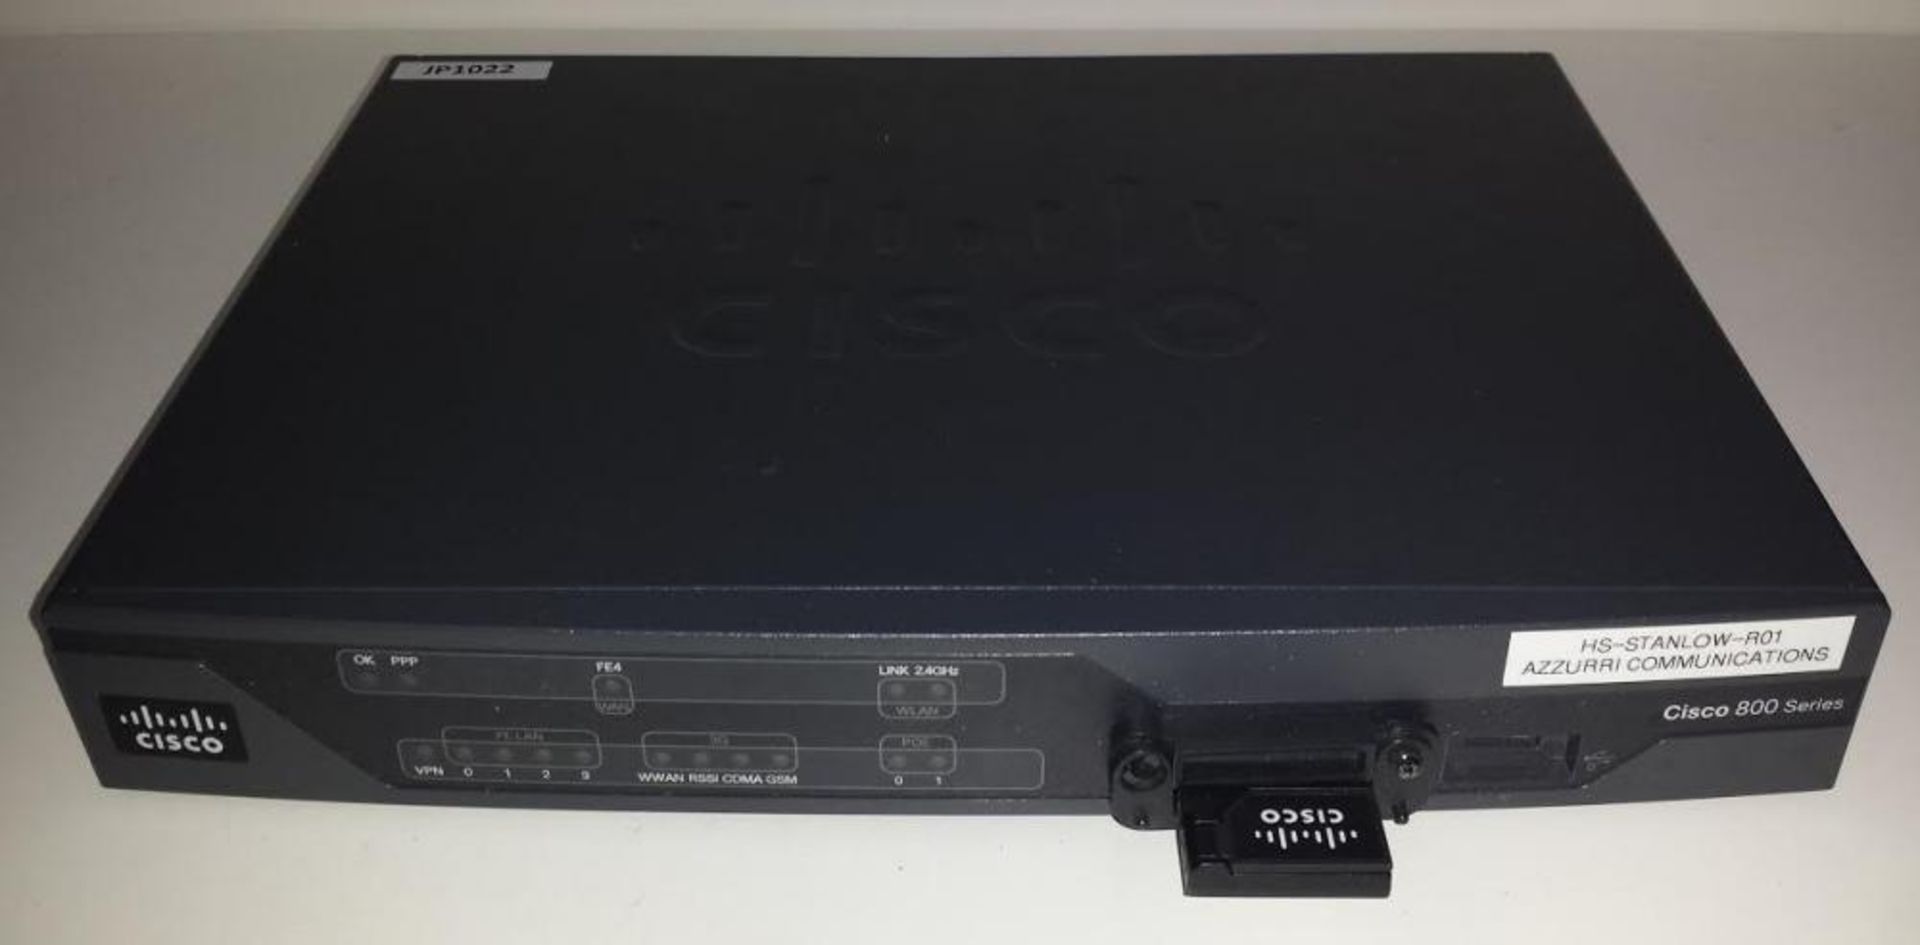 1 x Cisco 881G-K9 Integrated Service Router With PCEX-3G-HSPA-G Module - CL400 - Ref JP1022 - Locati - Image 2 of 5